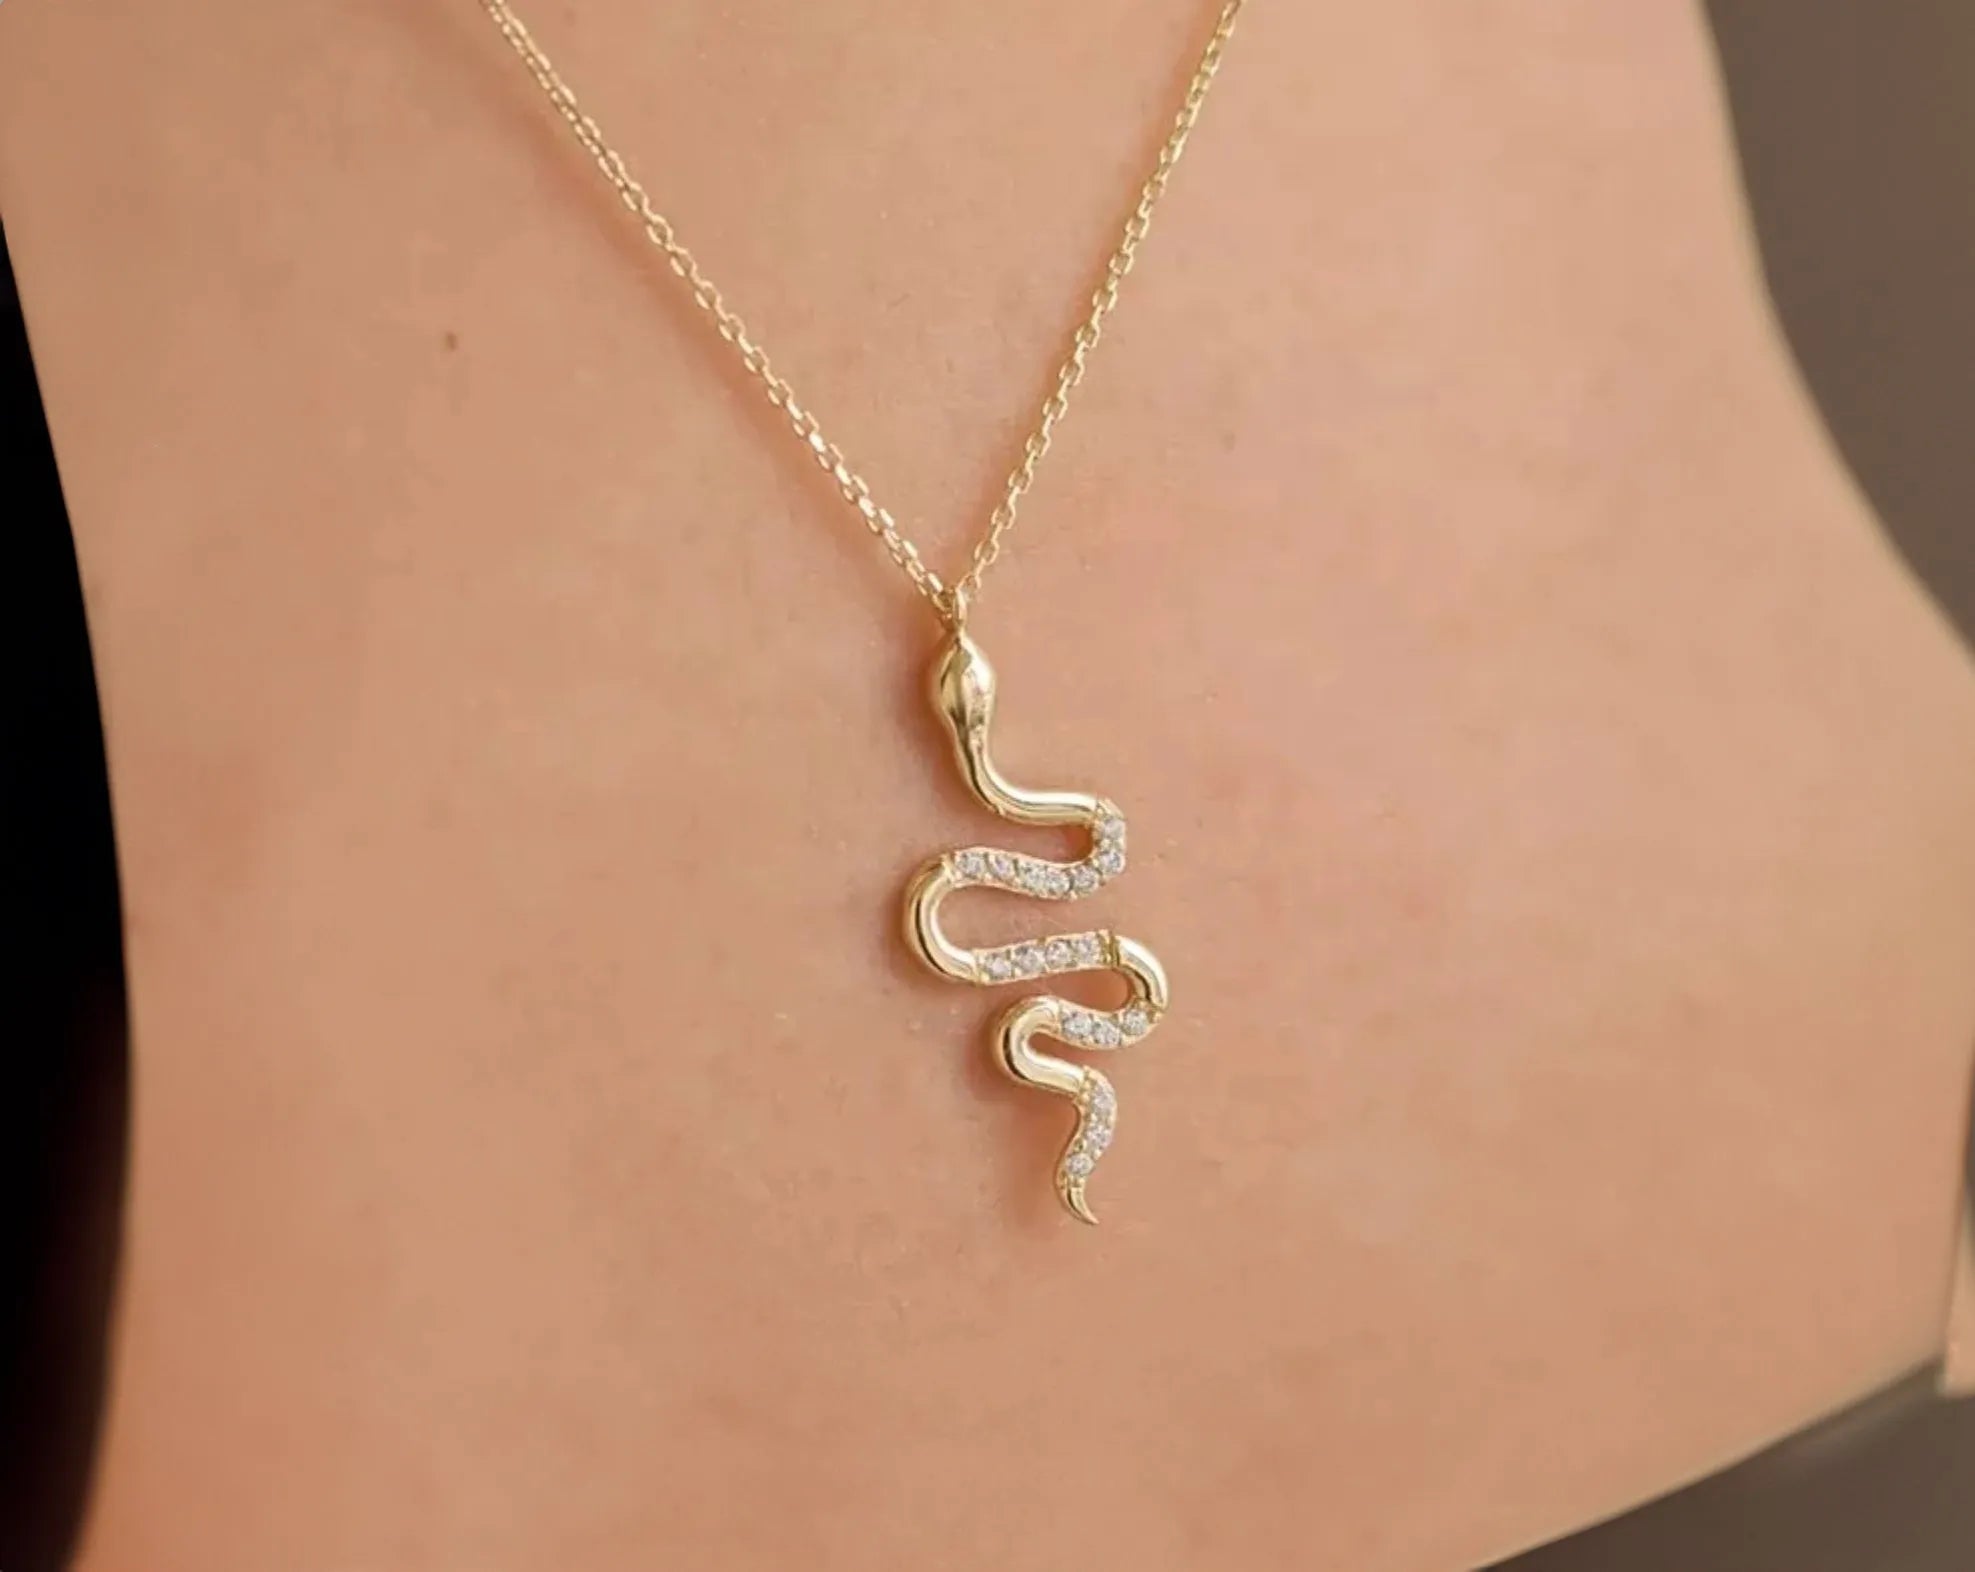 Ava Snake Necklace product images.